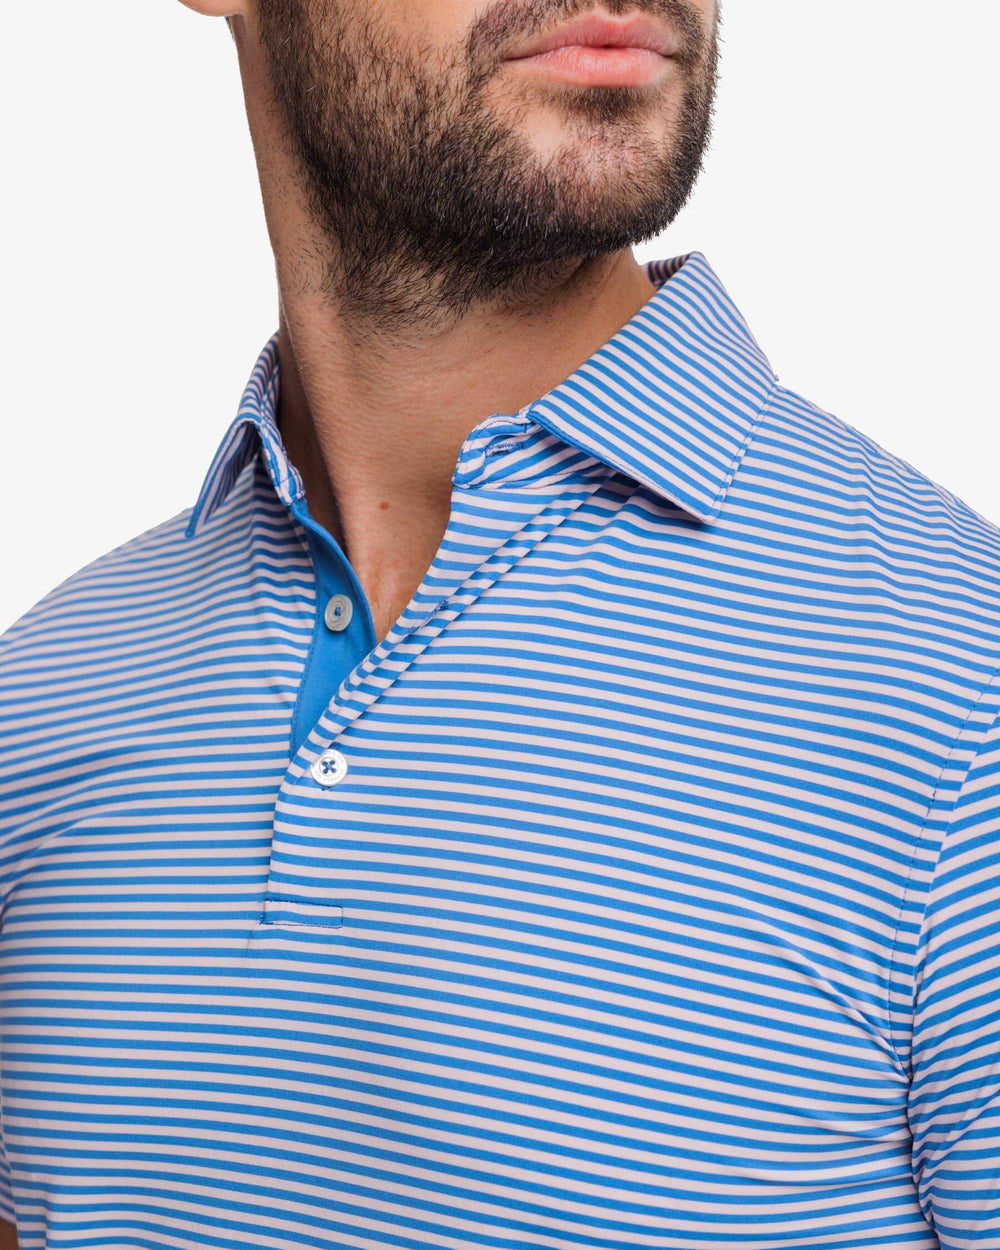 The detail view of the Southern Tide Shores Stripe brrr eeze Performance Polo Shirt by Southern Tide - Rose Blush